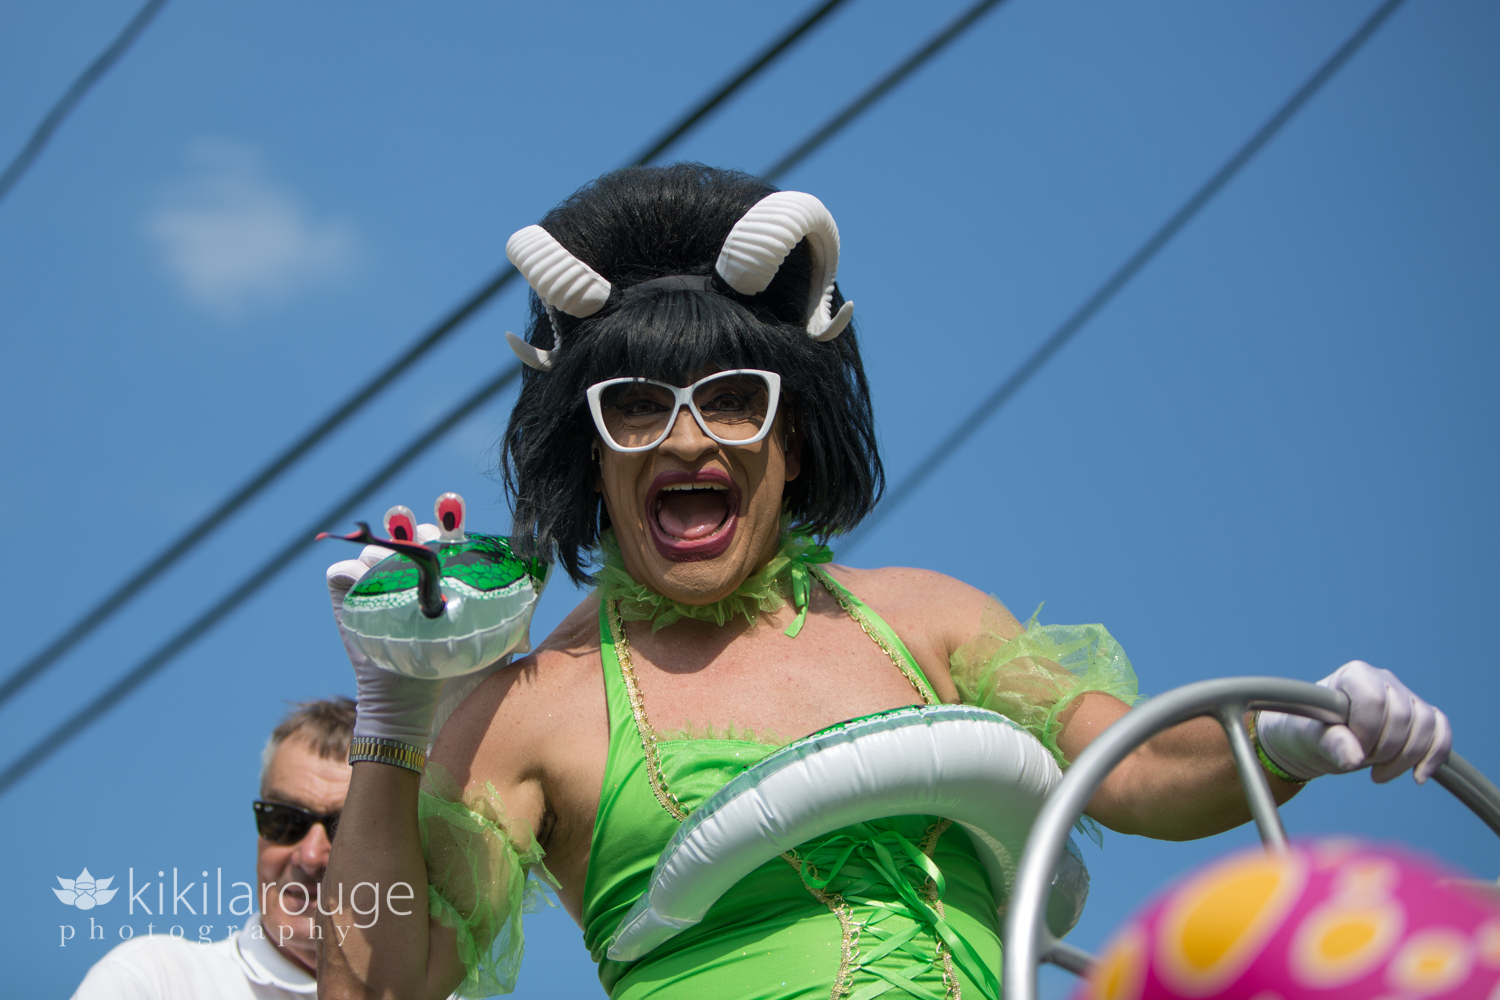 Drag queen with horns in green outfit